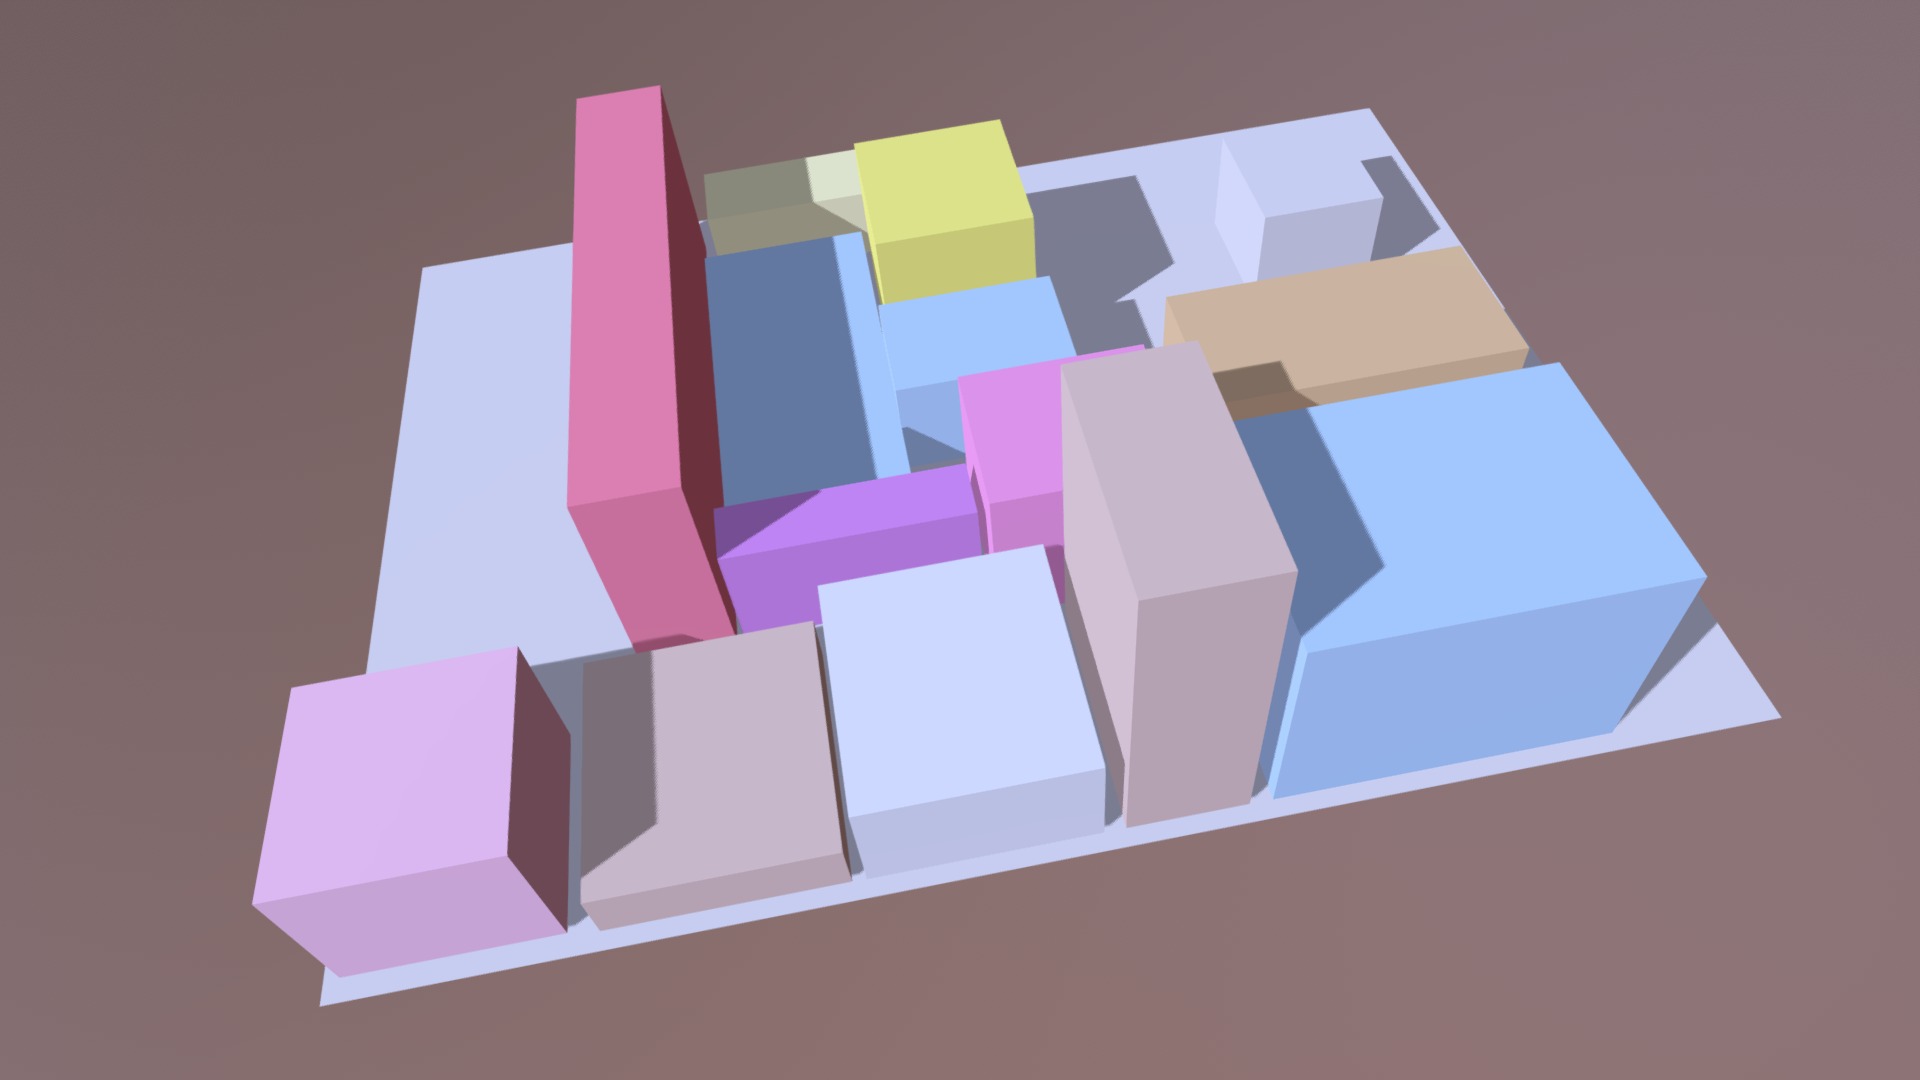 3D model Complejo Conceptual - This is a 3D model of the Complejo Conceptual. The 3D model is about a group of colorful cubes.